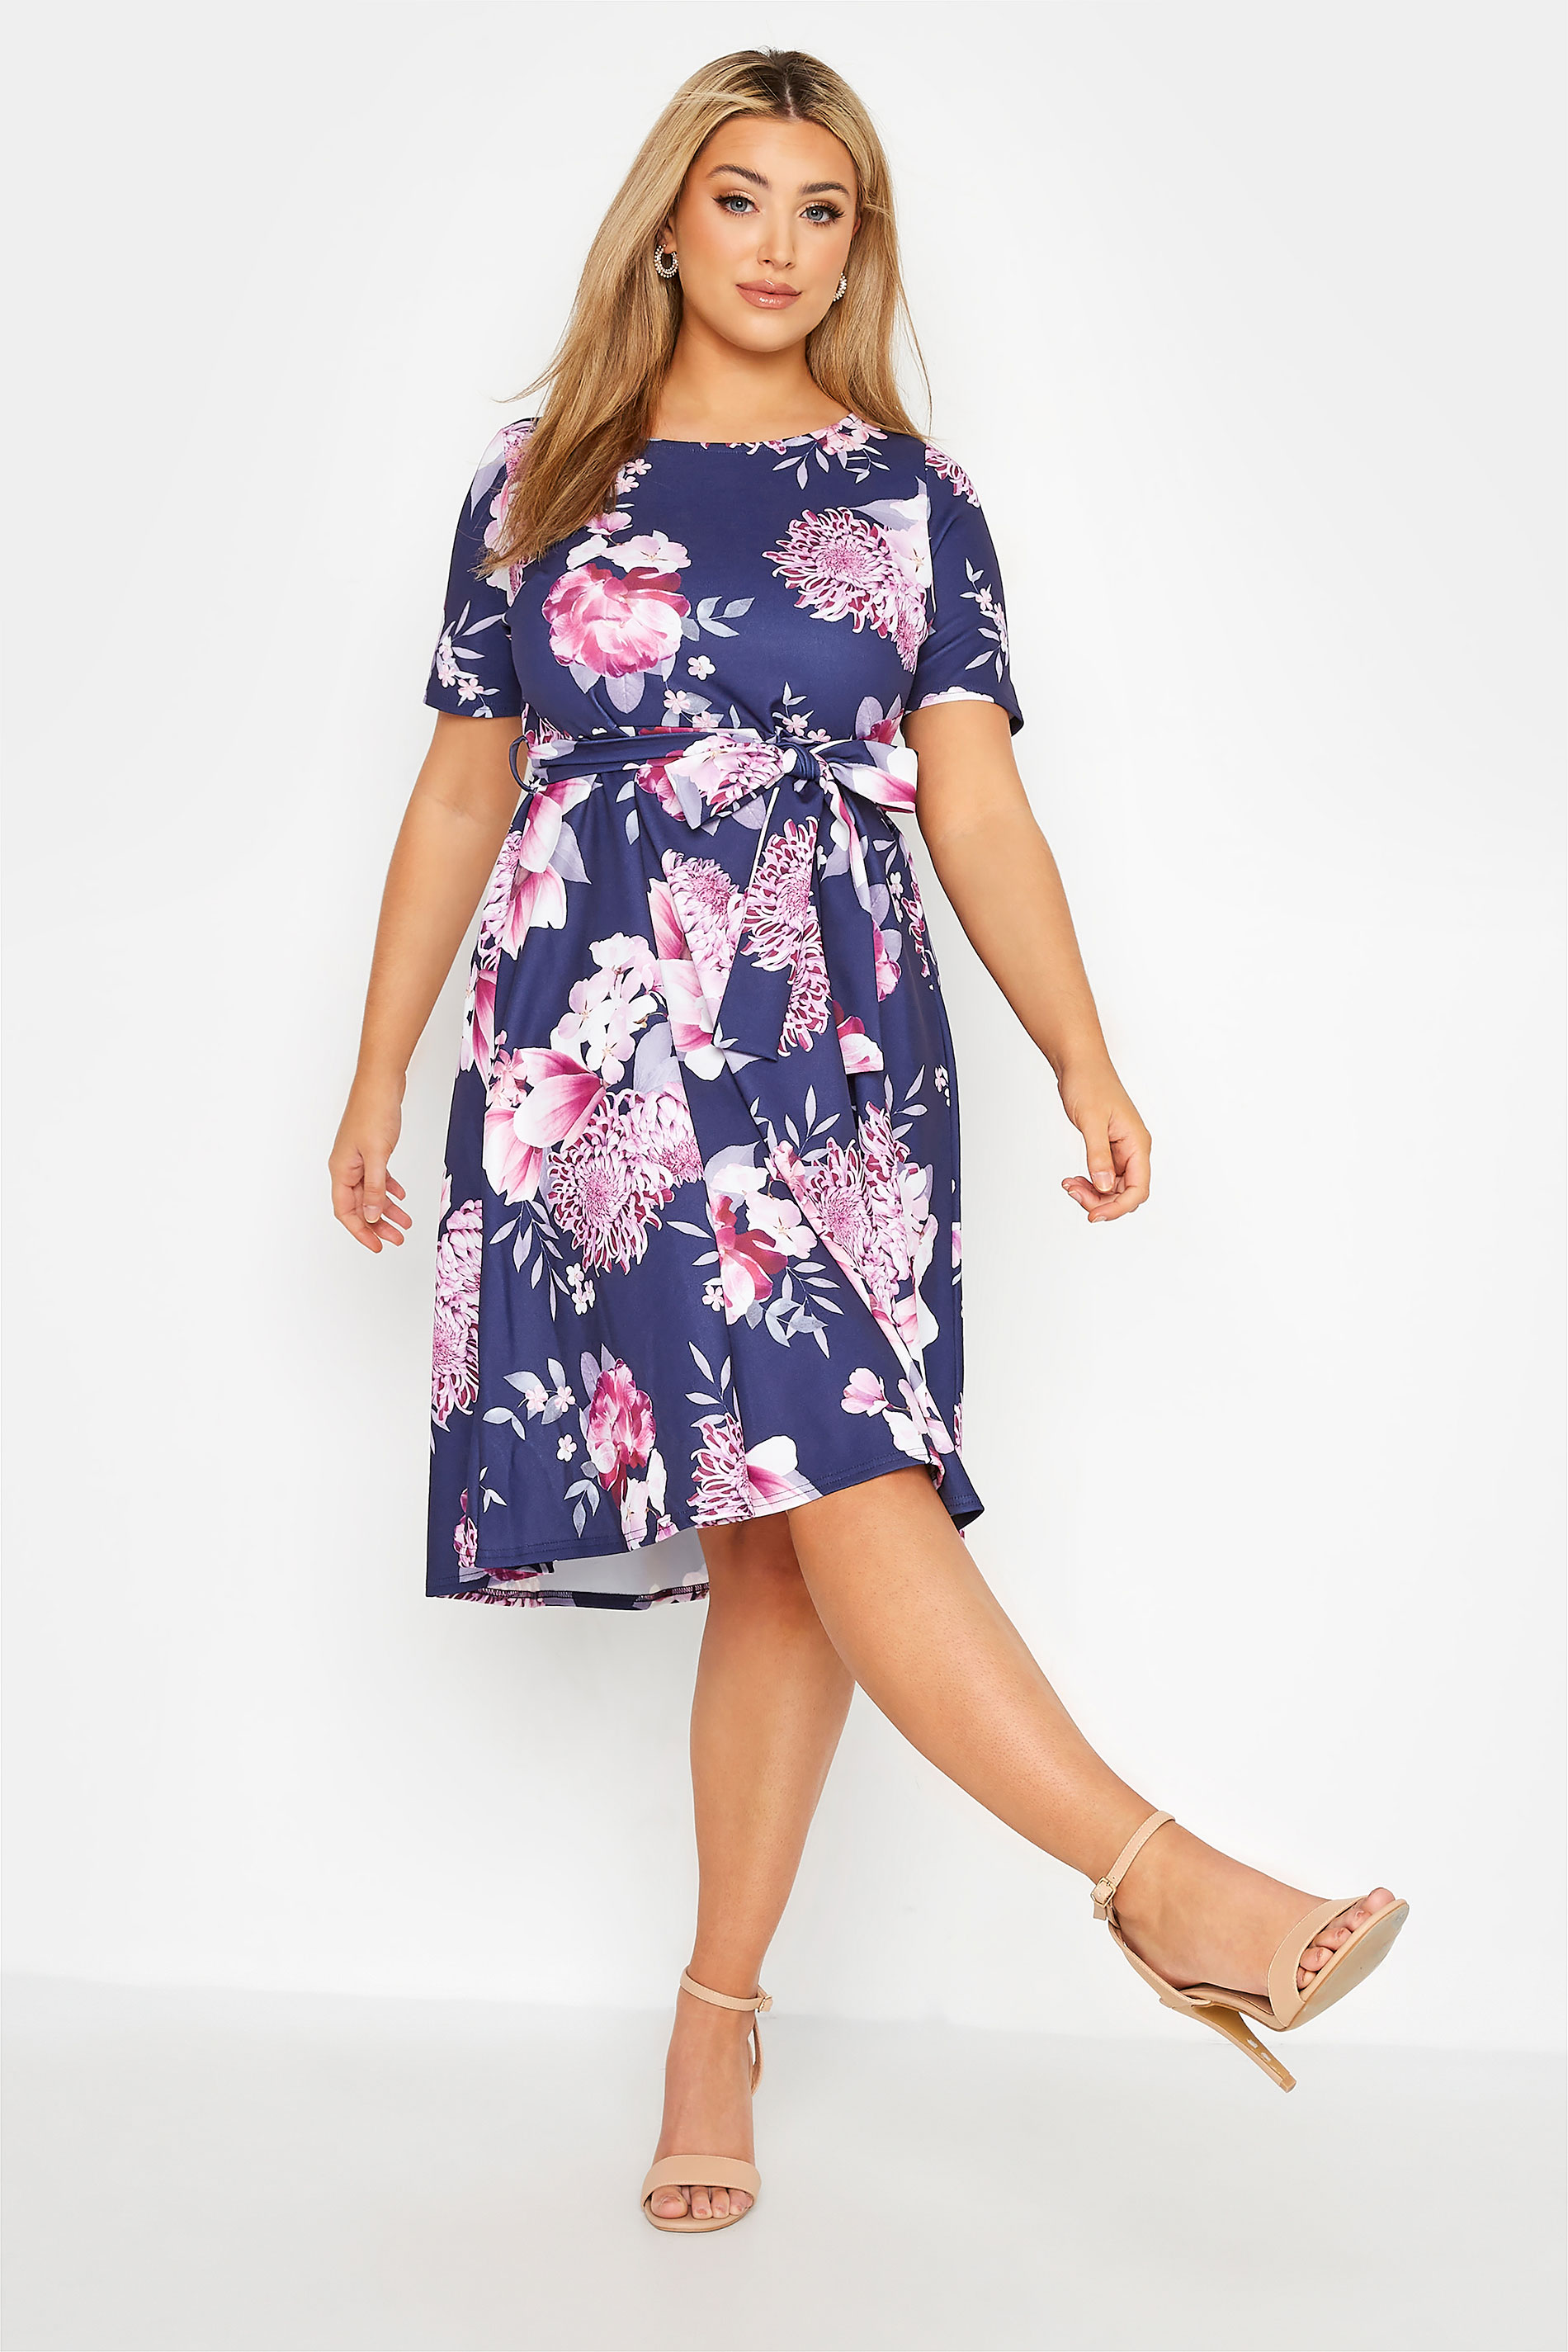 Robes Grande Taille Grande taille  Robes Patineuses | YOURS LONDON - Robe Midi Bleu Marine Floral Rose - TA23103